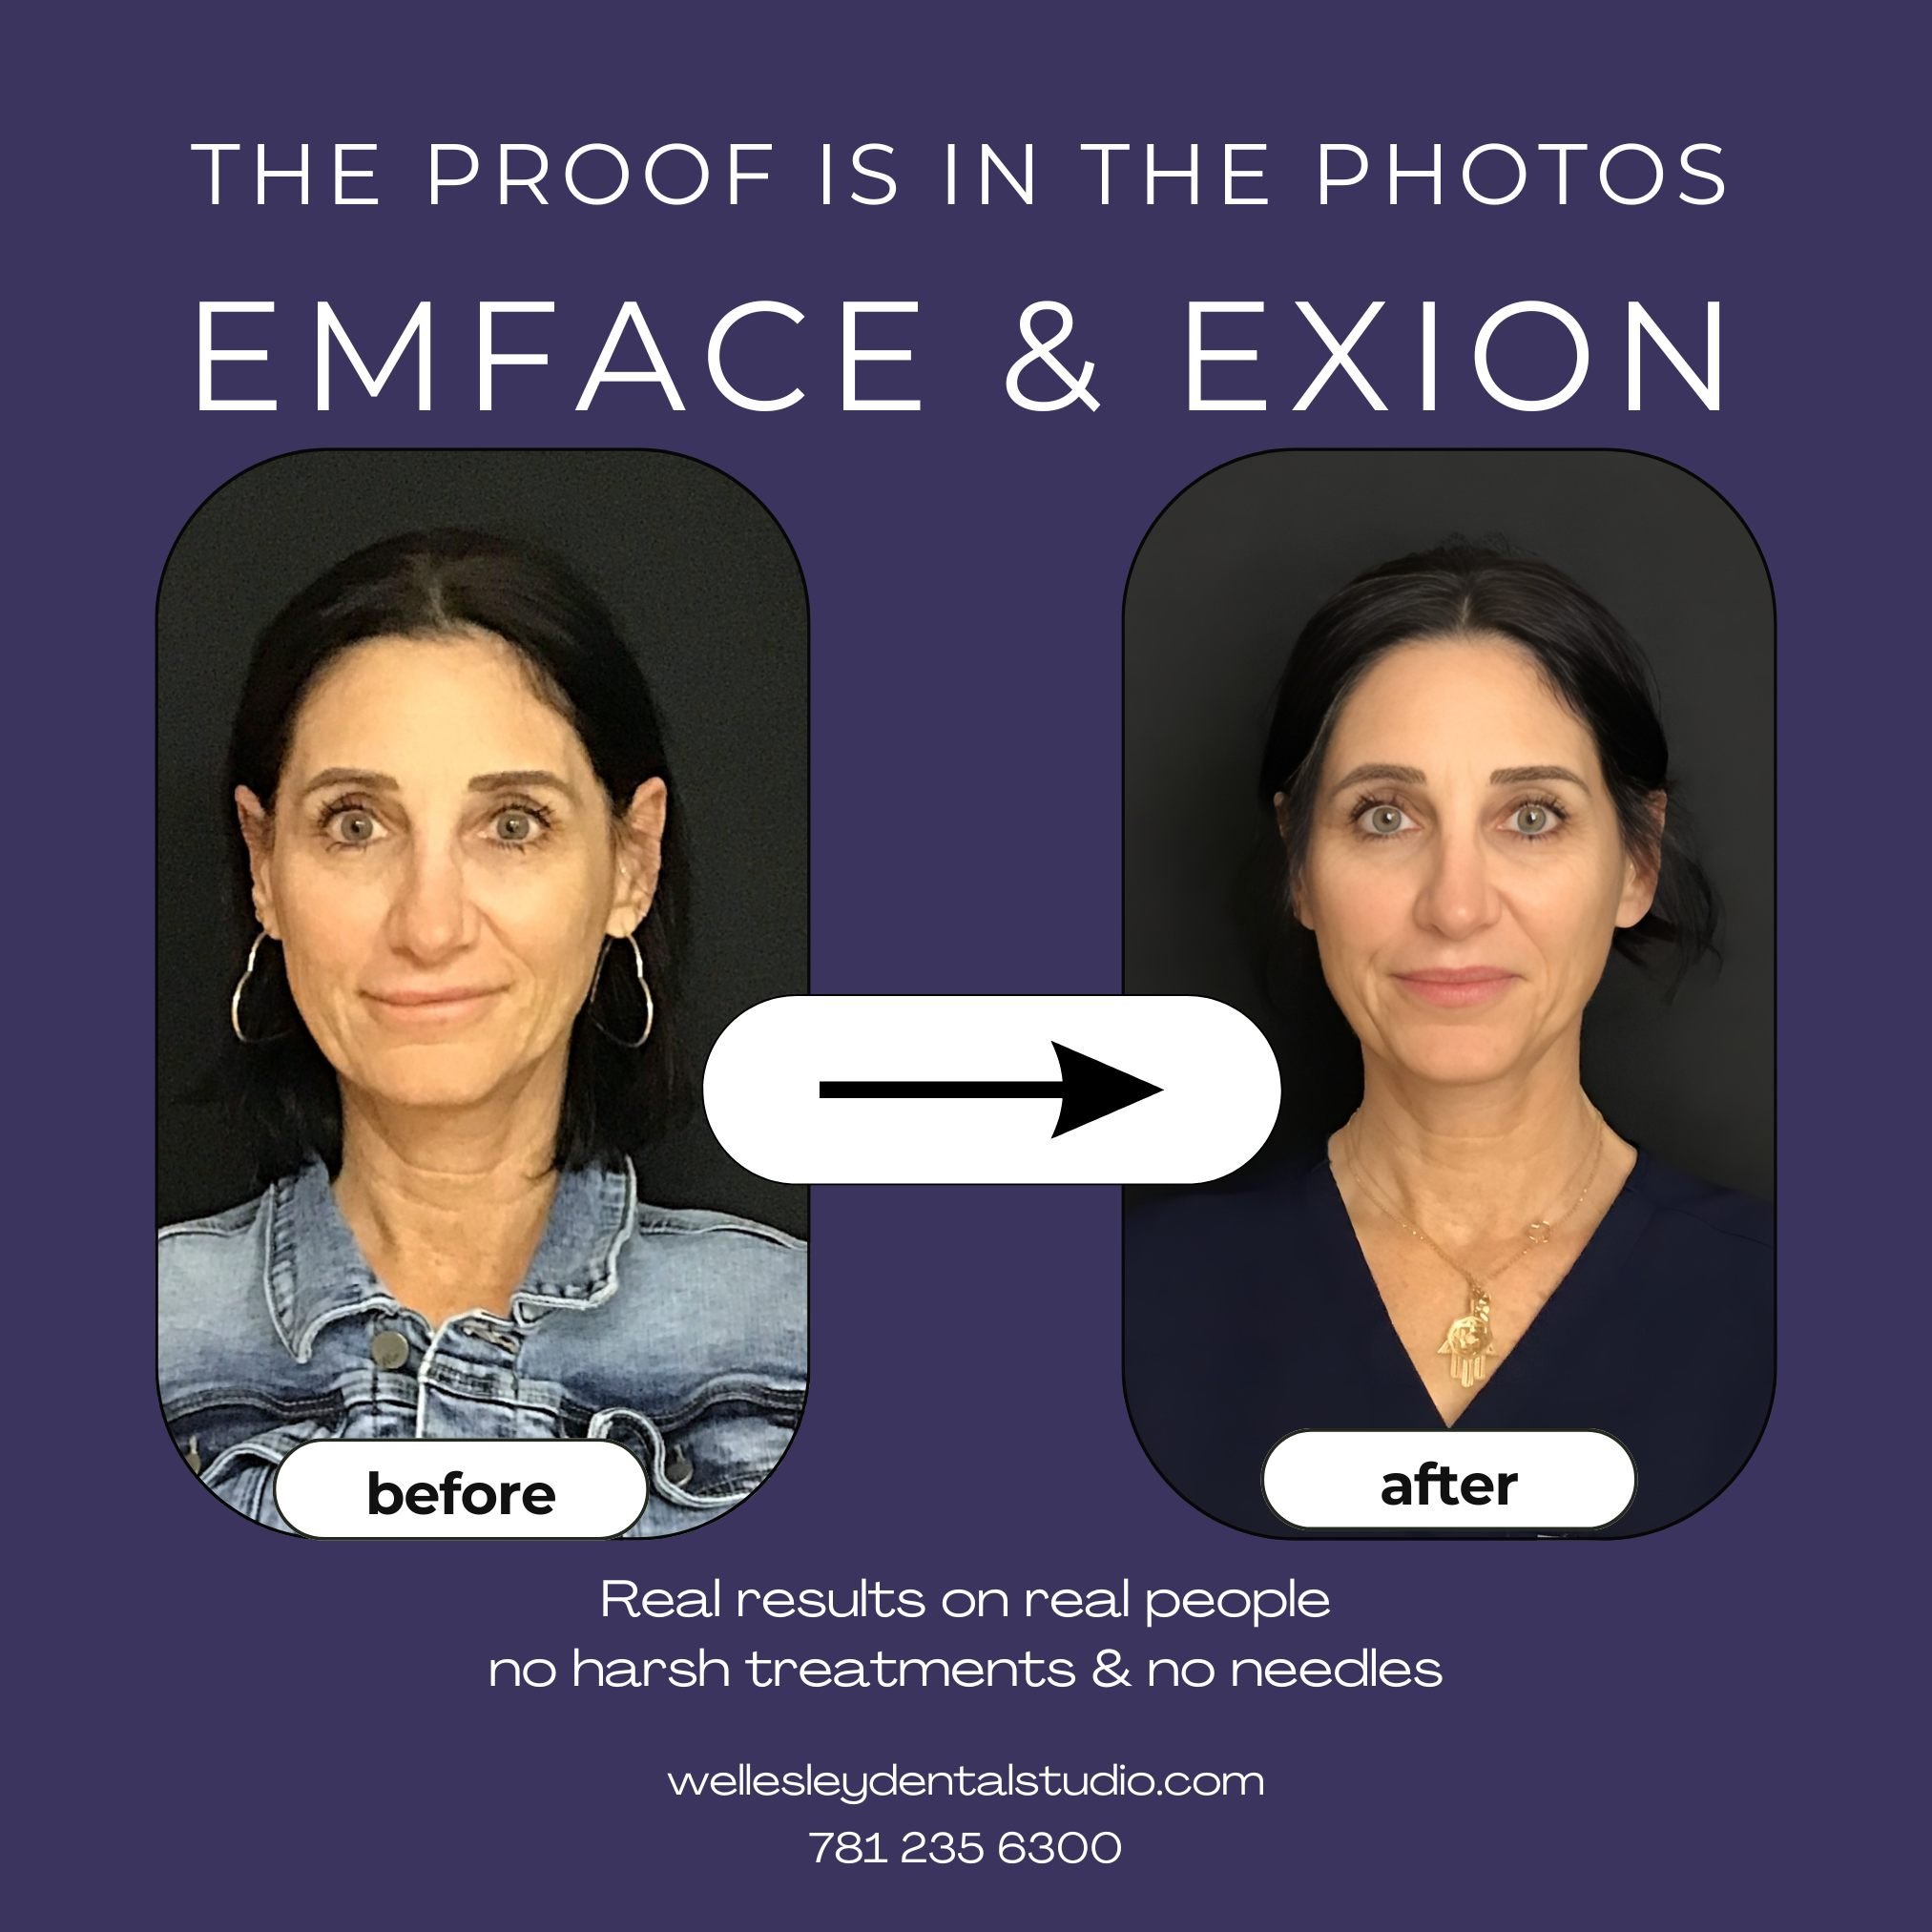 When the look you want is undetectably natural, we know just how to help! Wellesley Dental Studio and @btlaesthetics can deliver what you remember. #GlowUp #dentistknowsbest #aboutface #NaturalBeauty #lovingthelook #btlbeauty